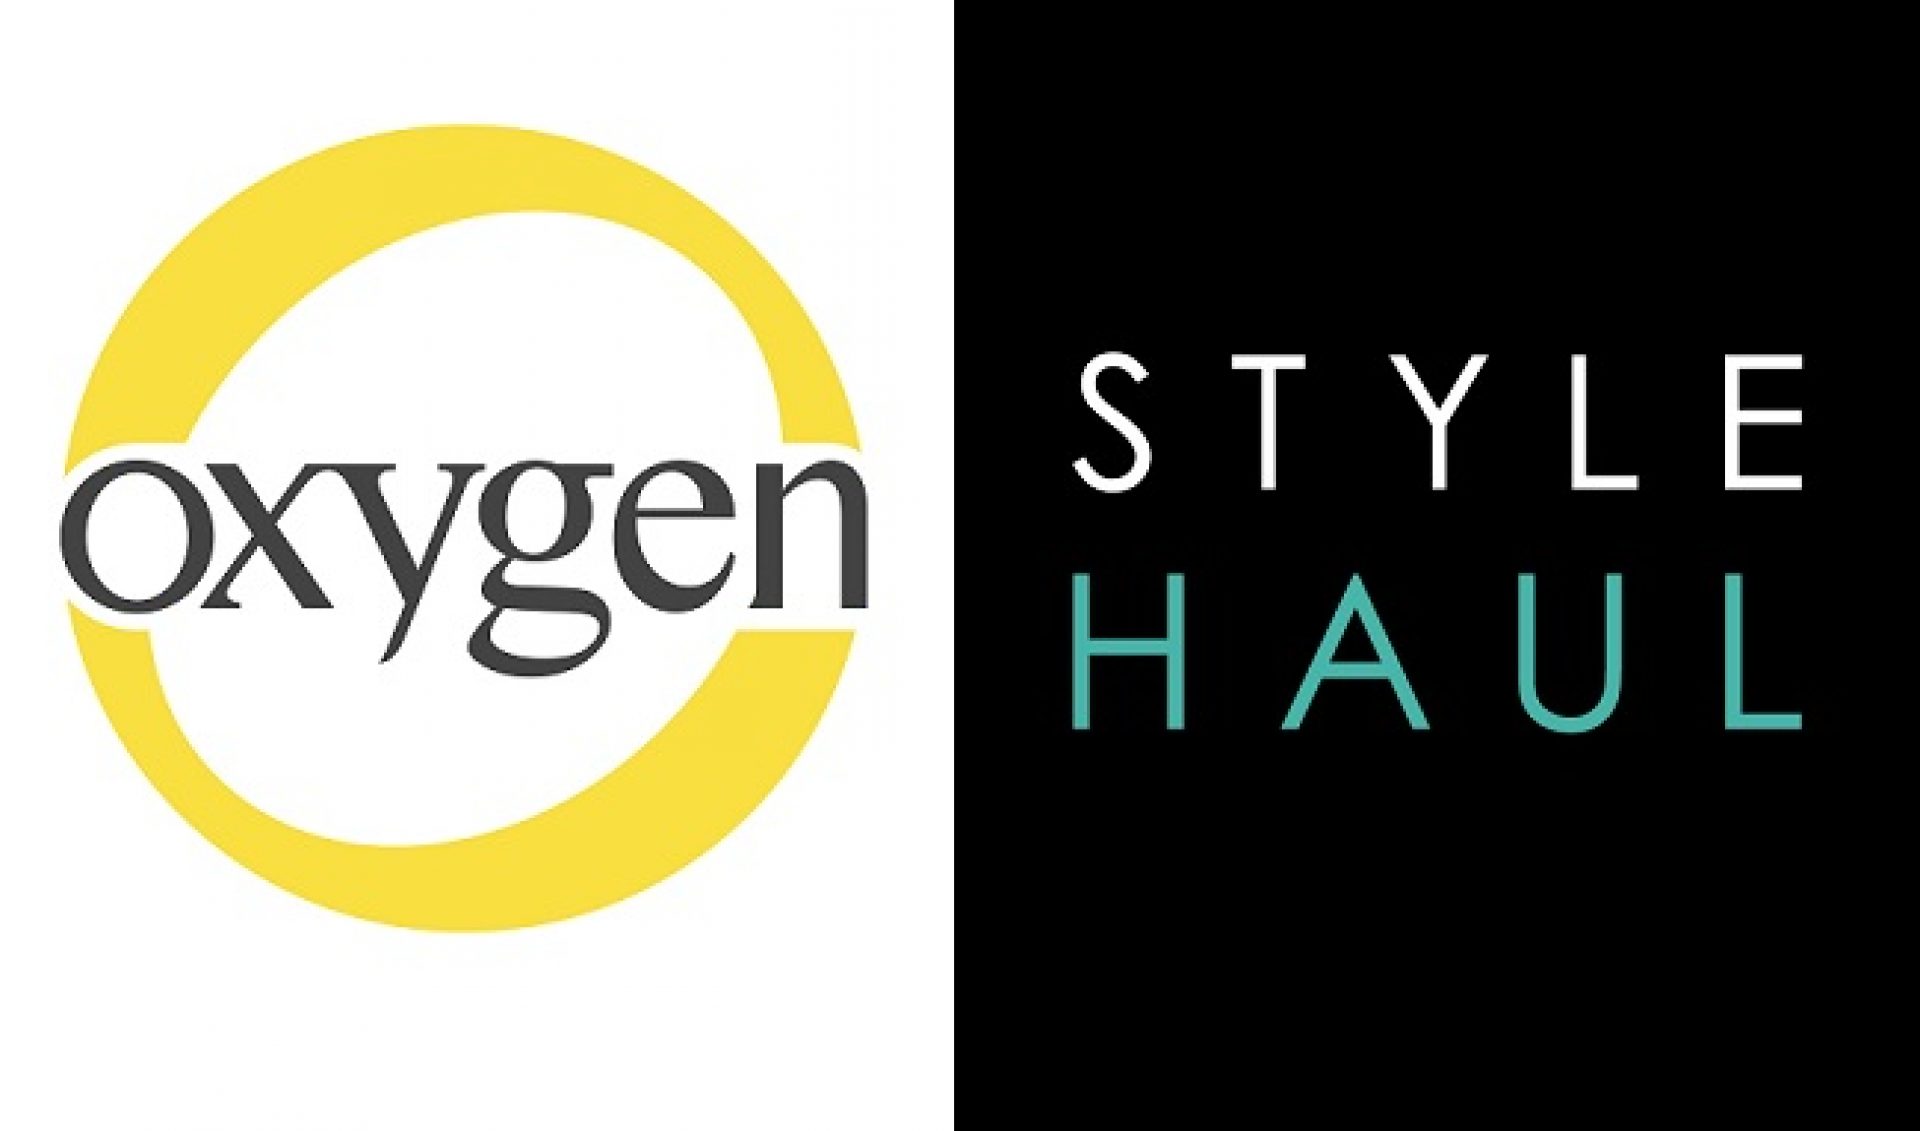 Oxygen, StyleHaul To Develop TV Show About YouTube Beauty Vloggers